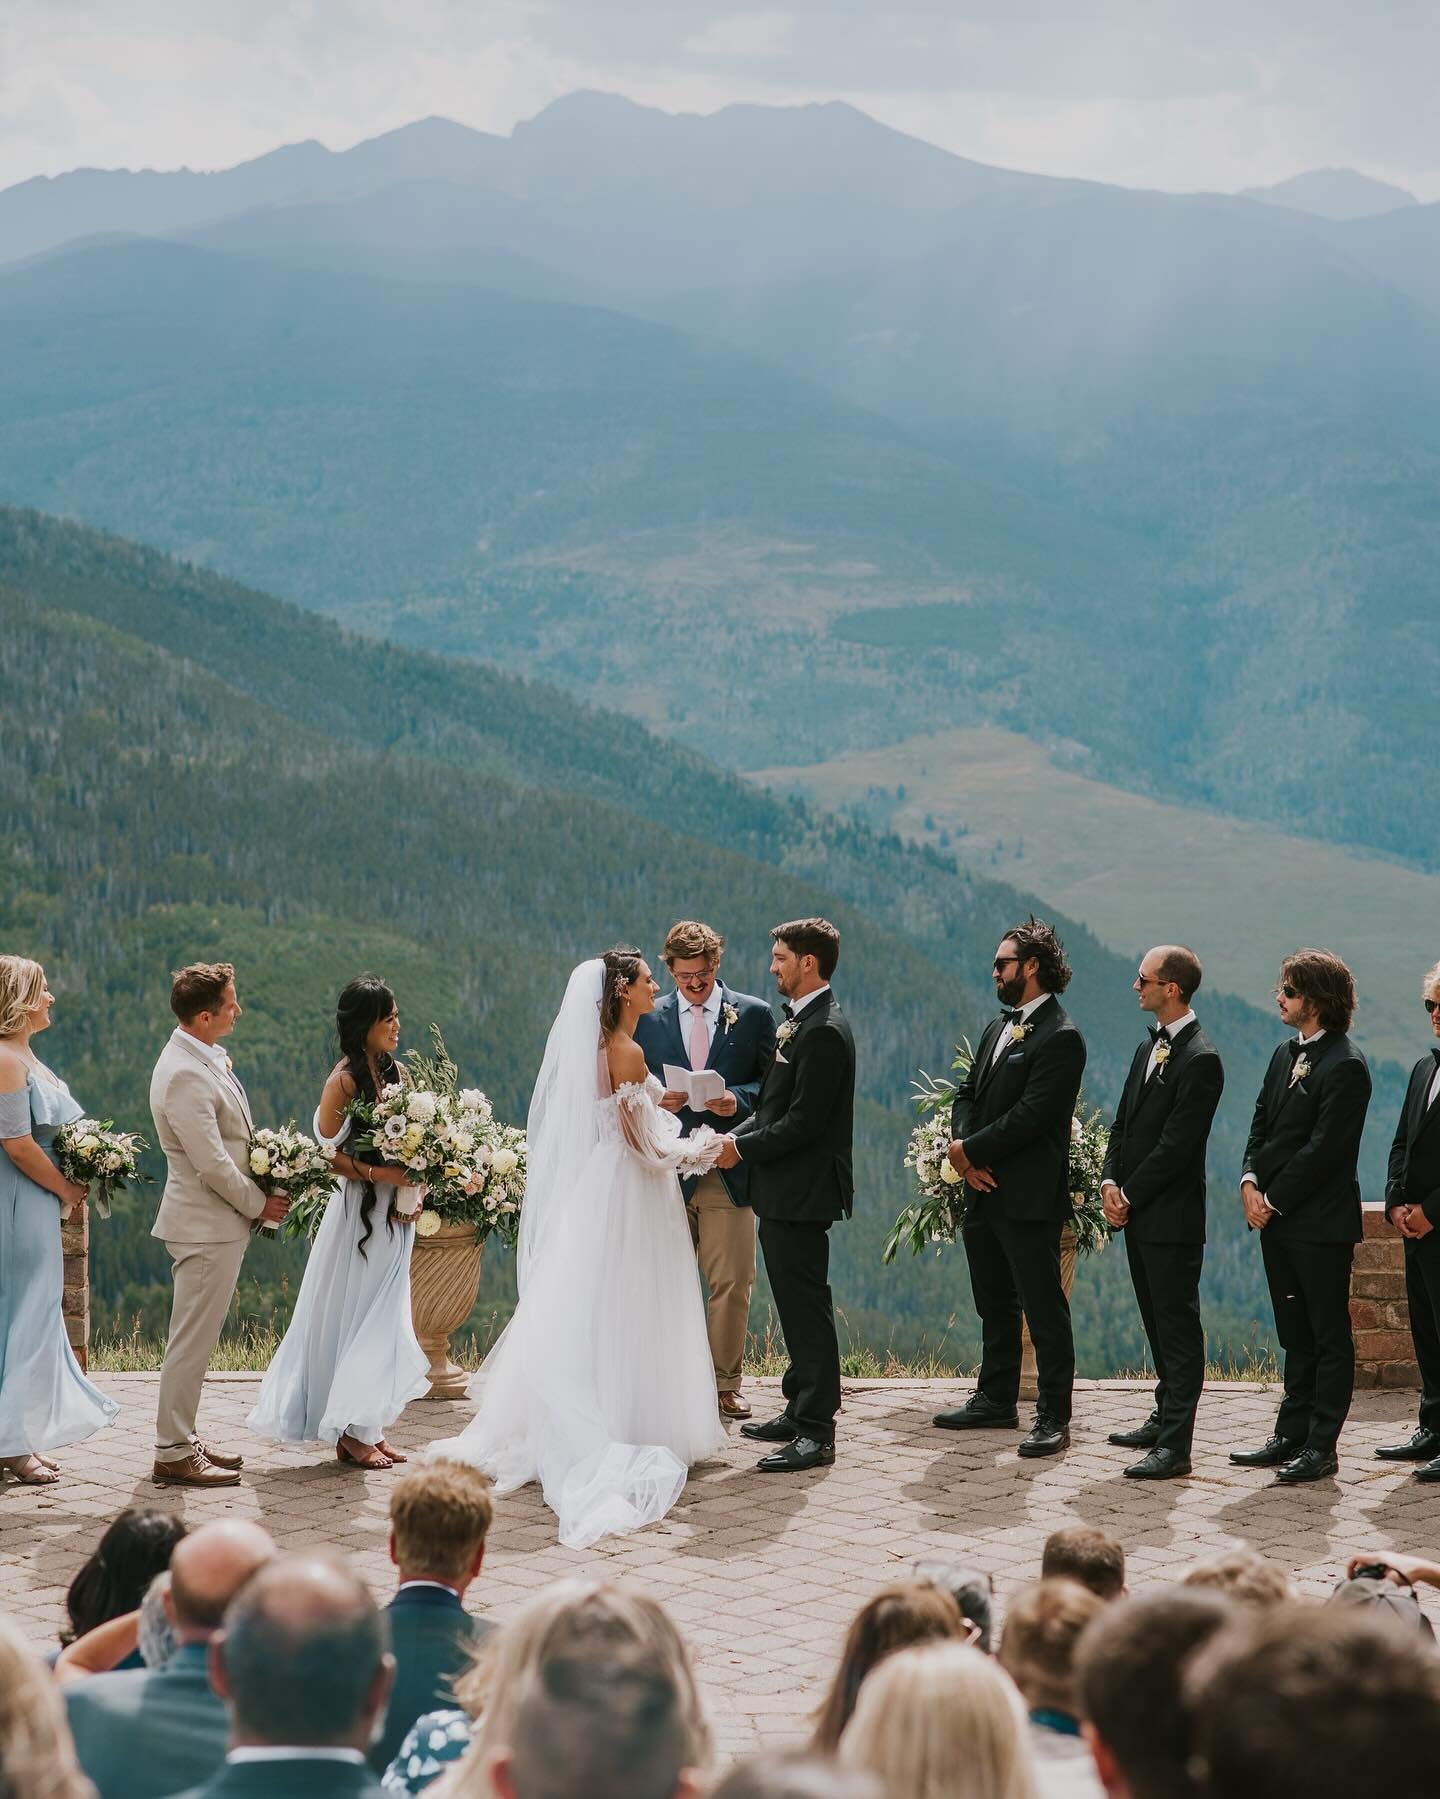 A gorgeous Vail wedding with two of the sweetest 🤍

#vailweddingphotographer #coloradoweddingphotographer #coloradowedding #weddingphotography #elopecolorado